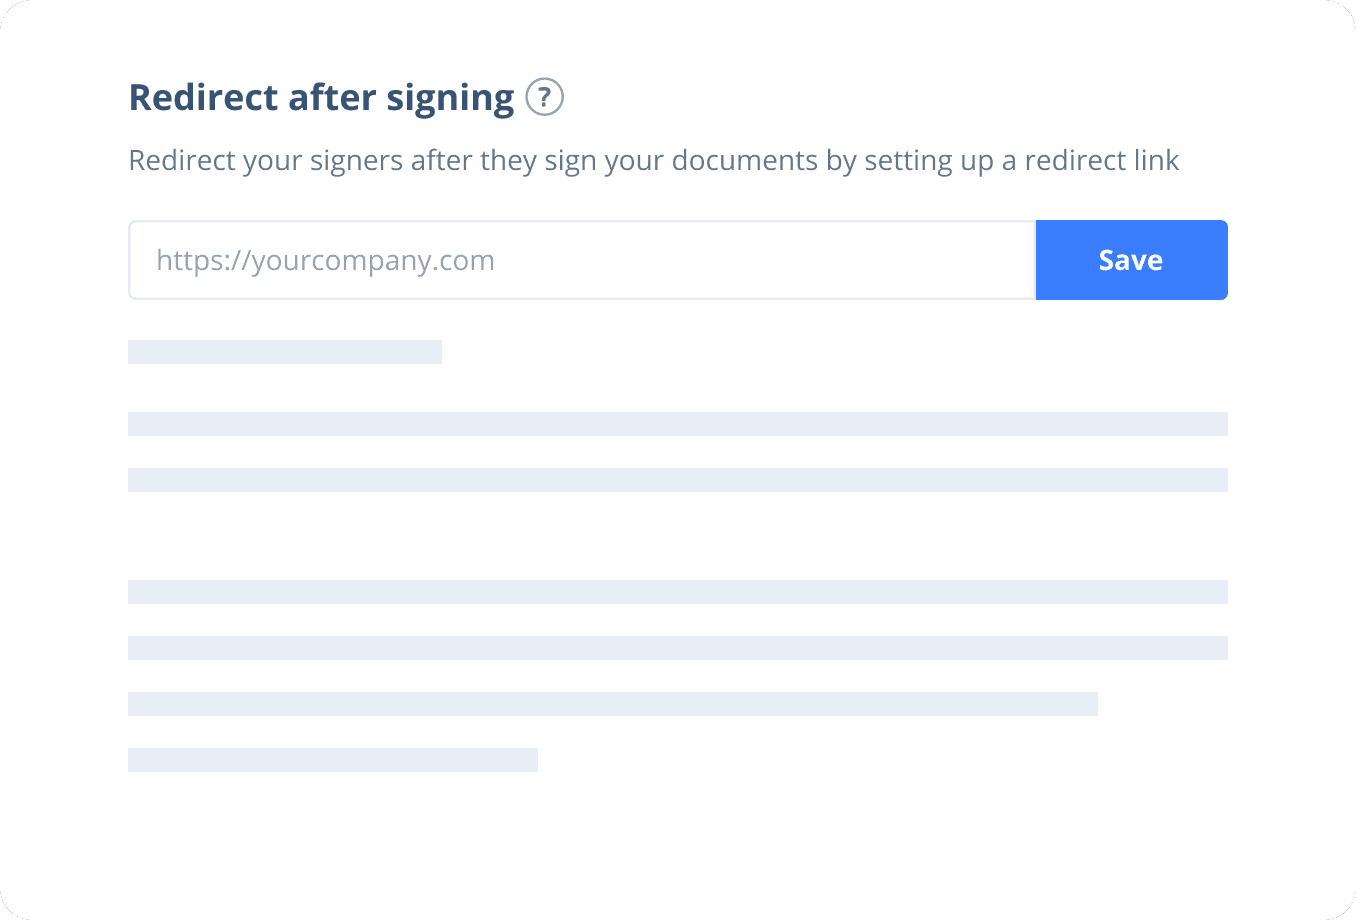 Redirect signers after signing